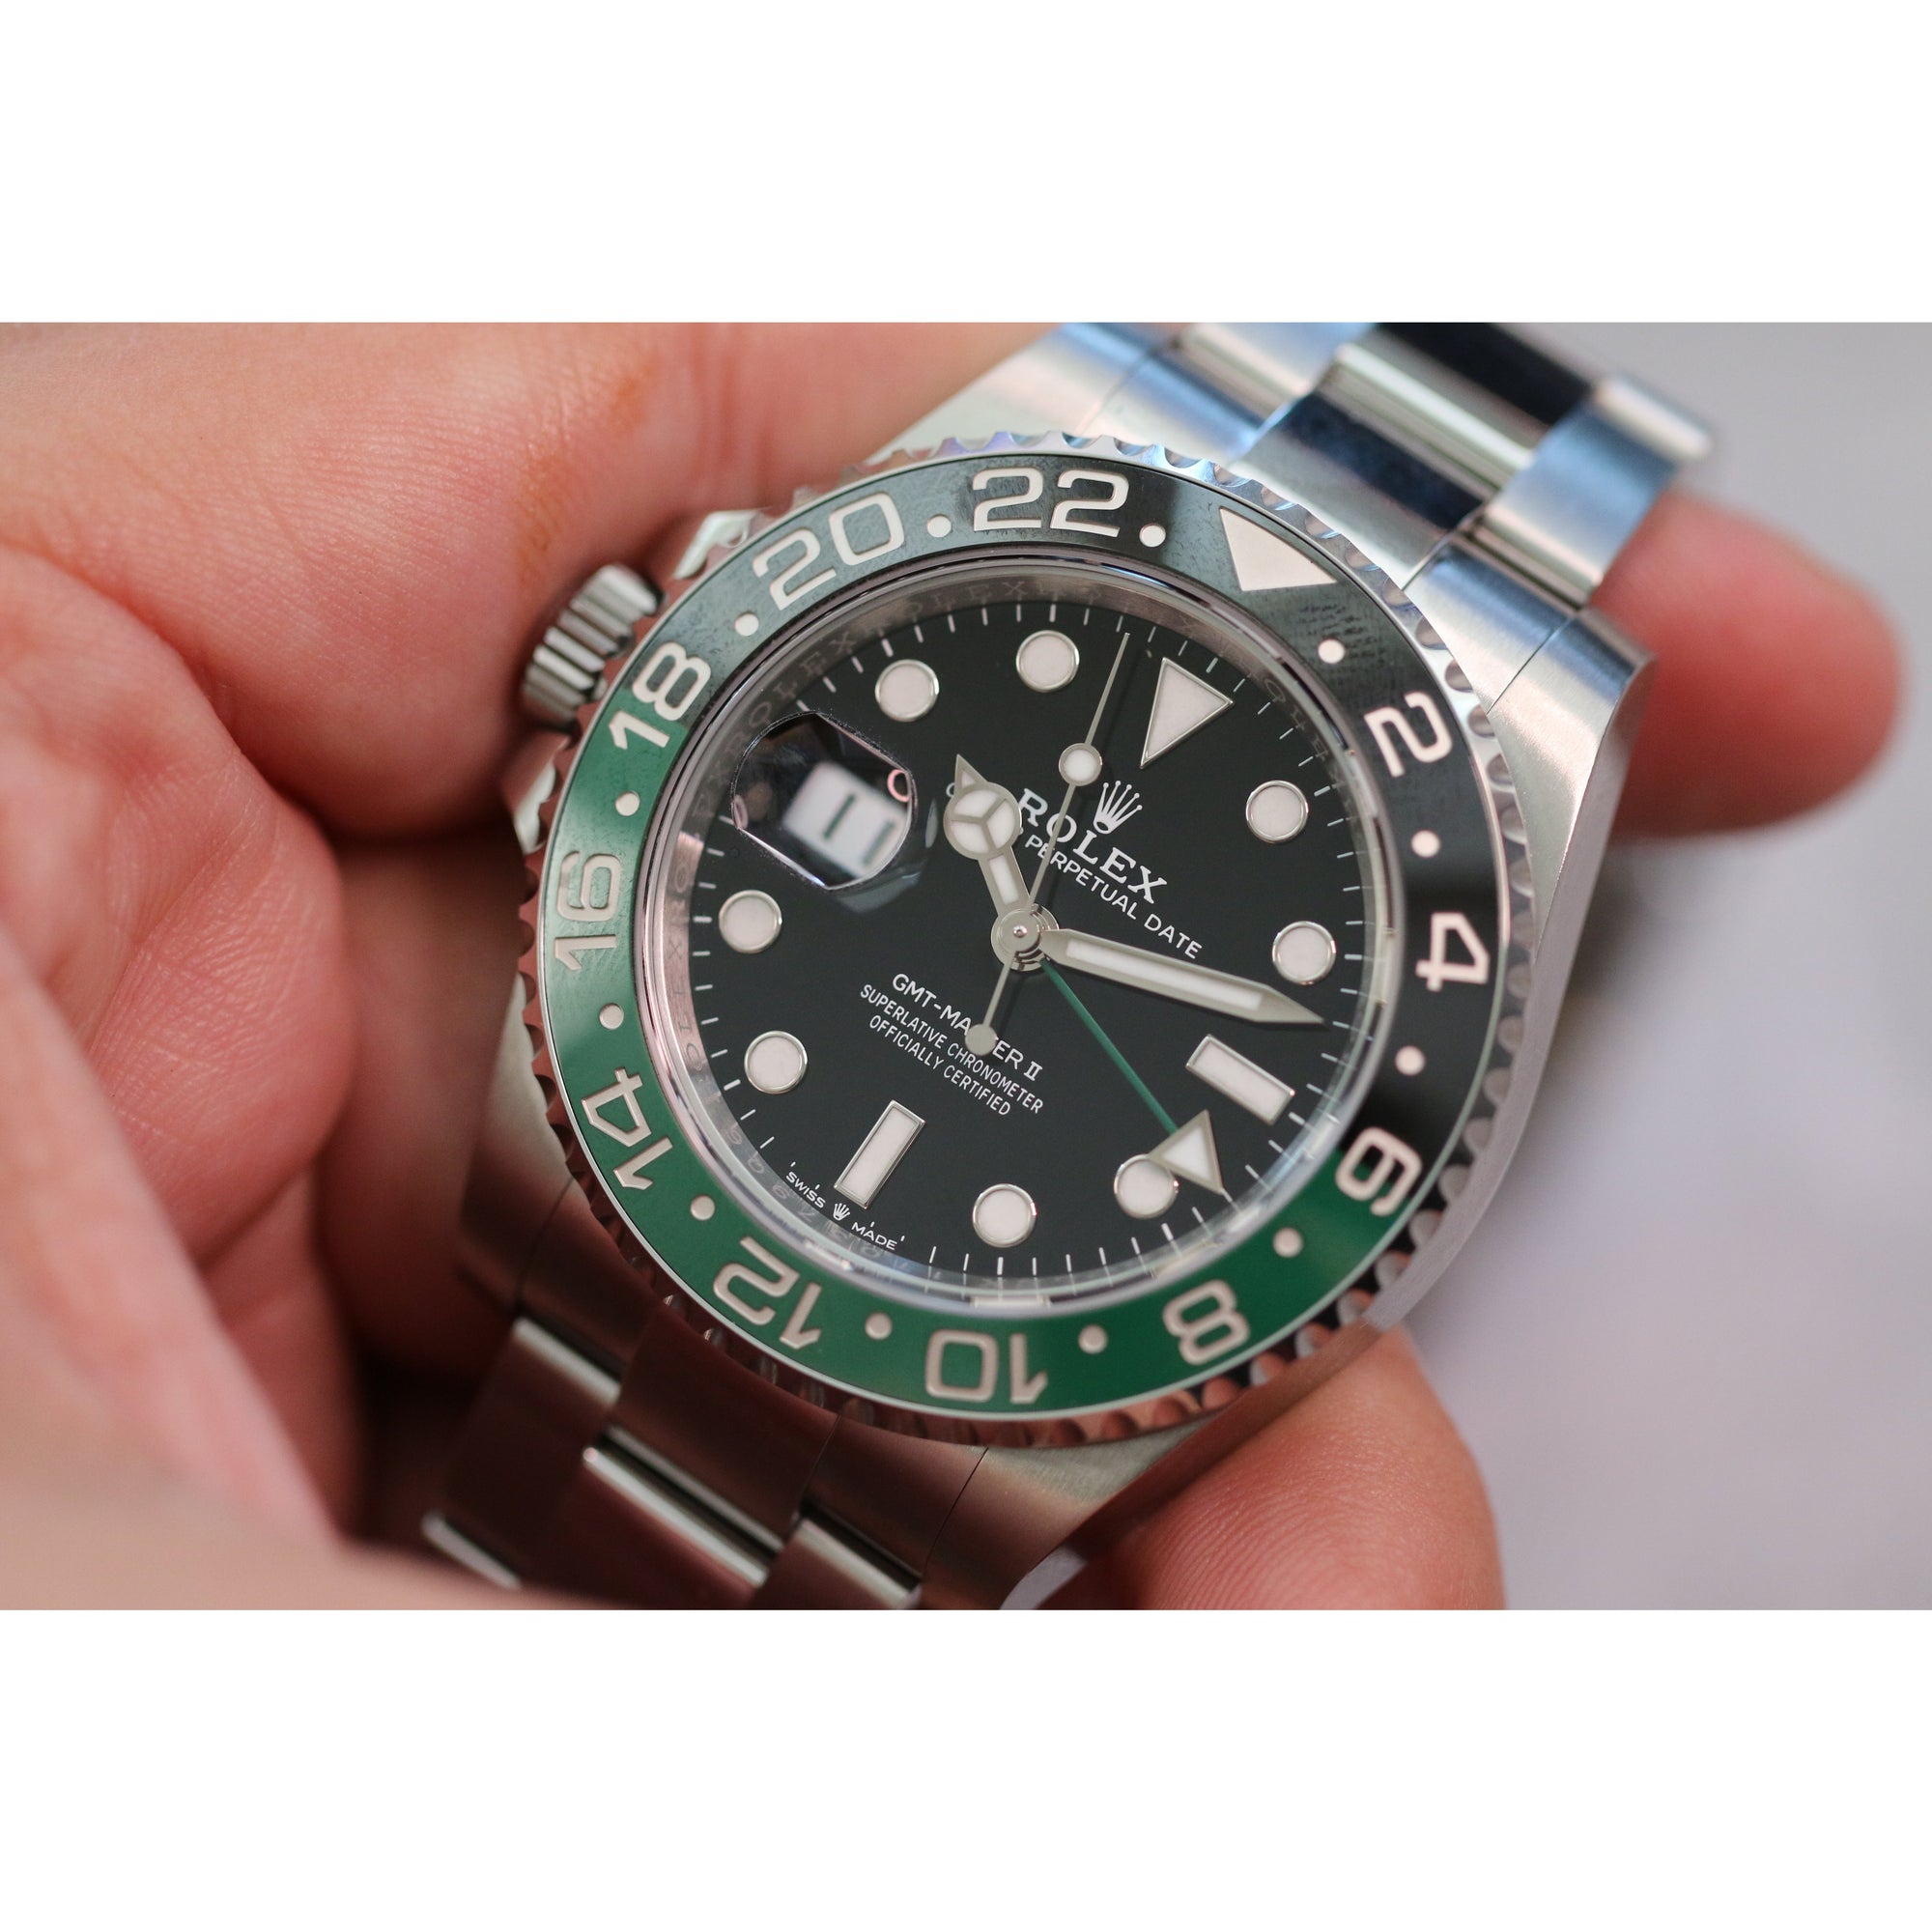 FOR SALE: New Rolex Submariner HULK, Water Tested + Regulated +